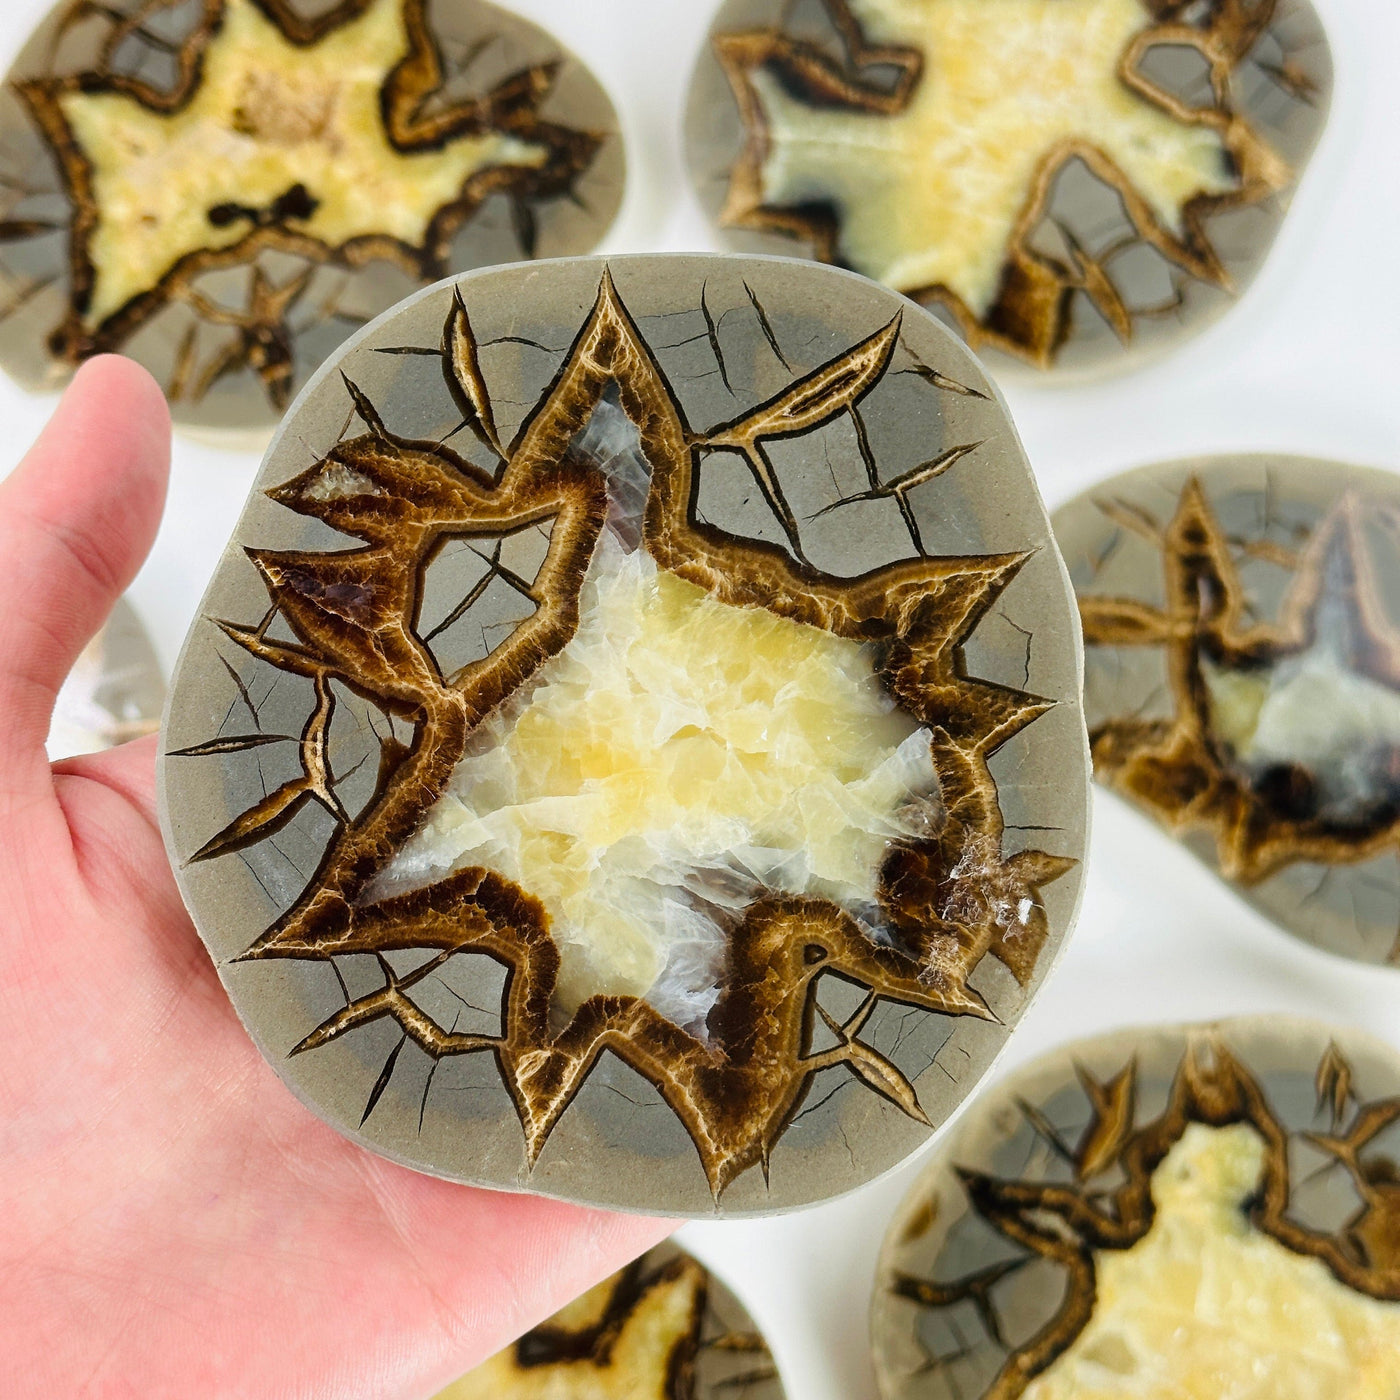 Septarian platter with decorations in the background